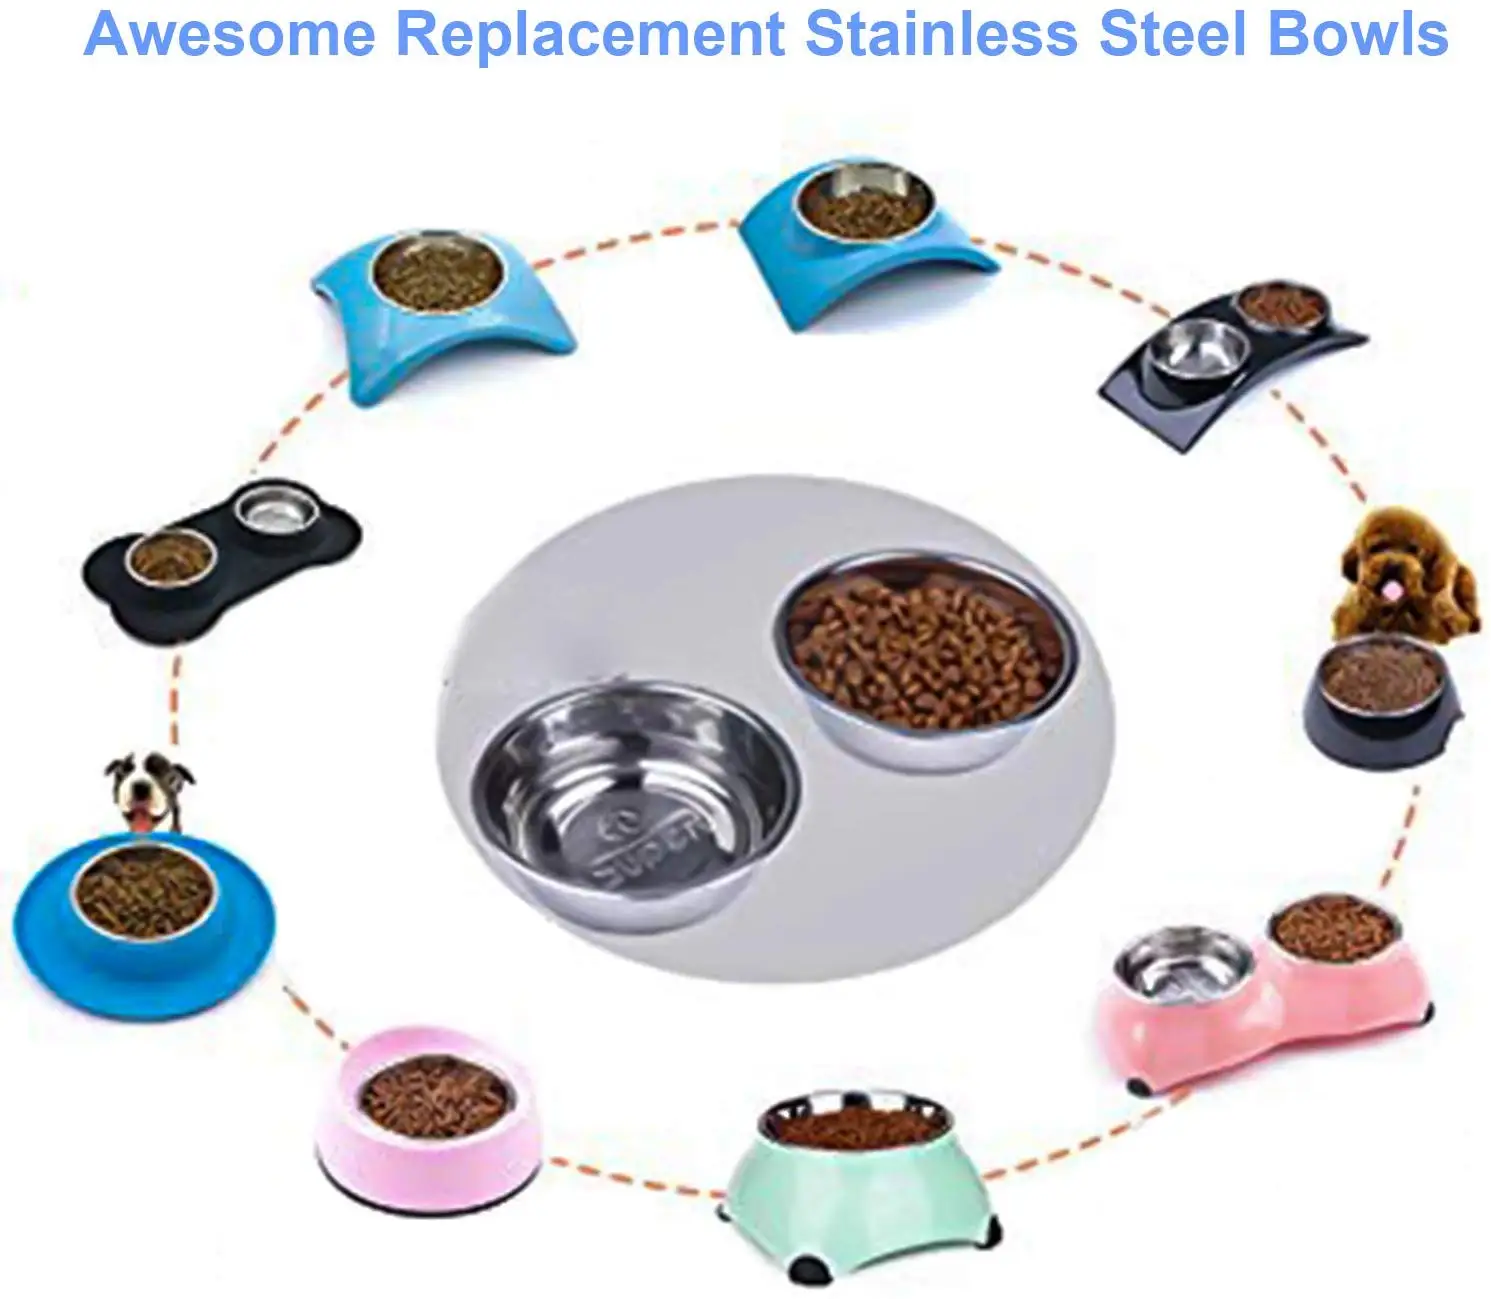 2 Cup Super Design Two Piece Replacement Stainless Steel Bowls for Pet Feeding Station for Dogs and Cats 